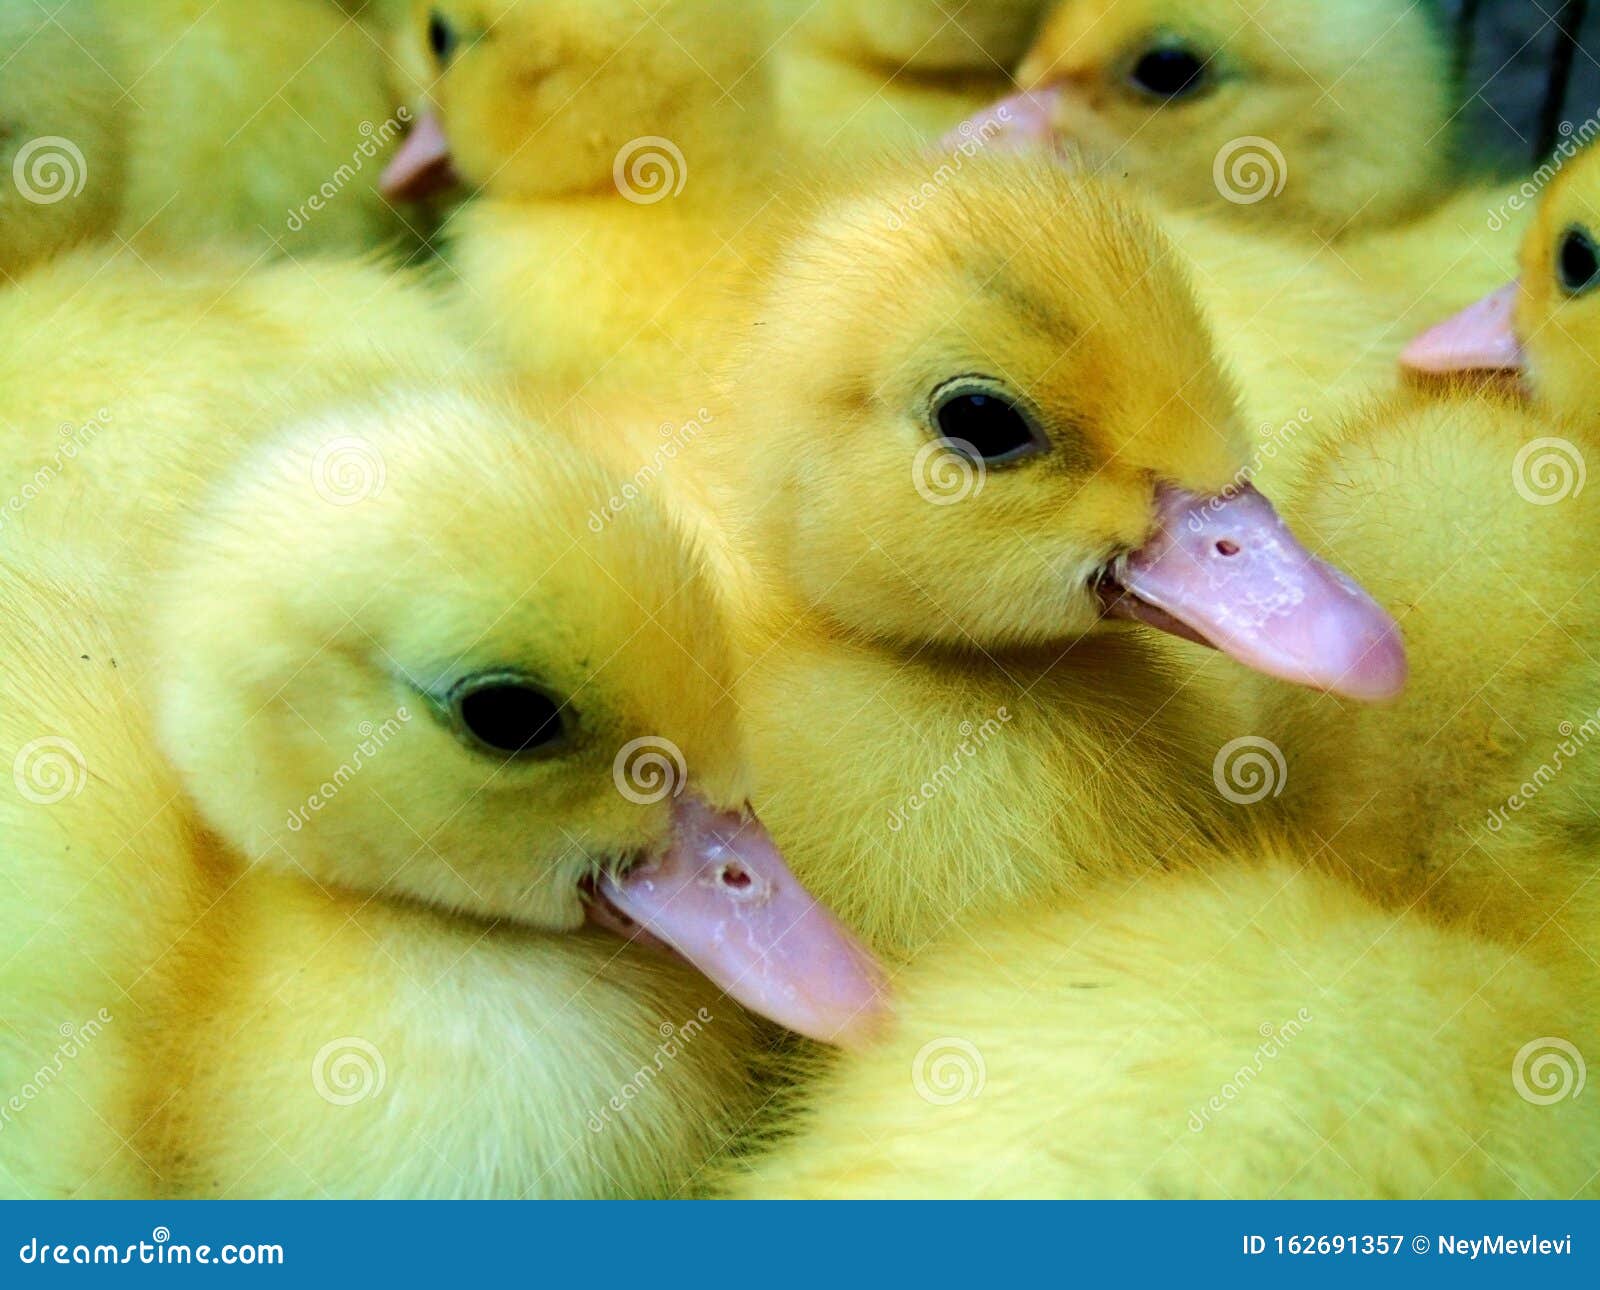 Cute yellow ducklings stock image. Image of beauty, background - 162691357